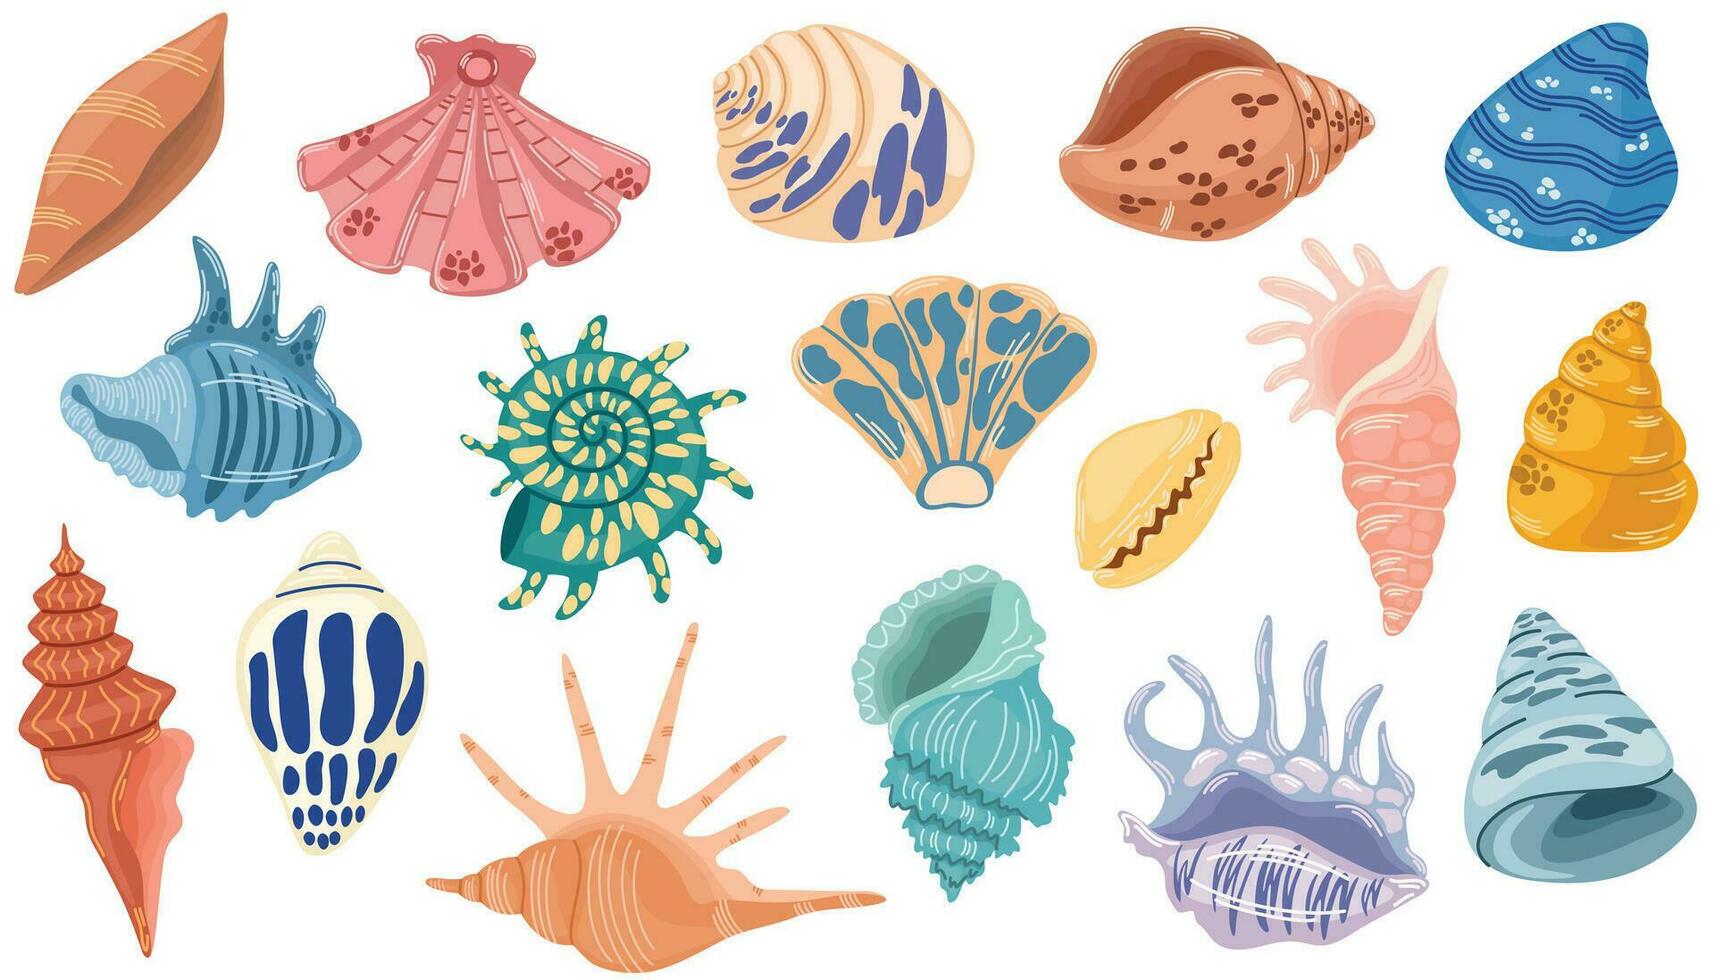 Seashell set. Various mollusk seashells different forms, starfish, coral. Underwater flora, sea plants. Summer vacation collection, tropical beach shells. Vector illustration.